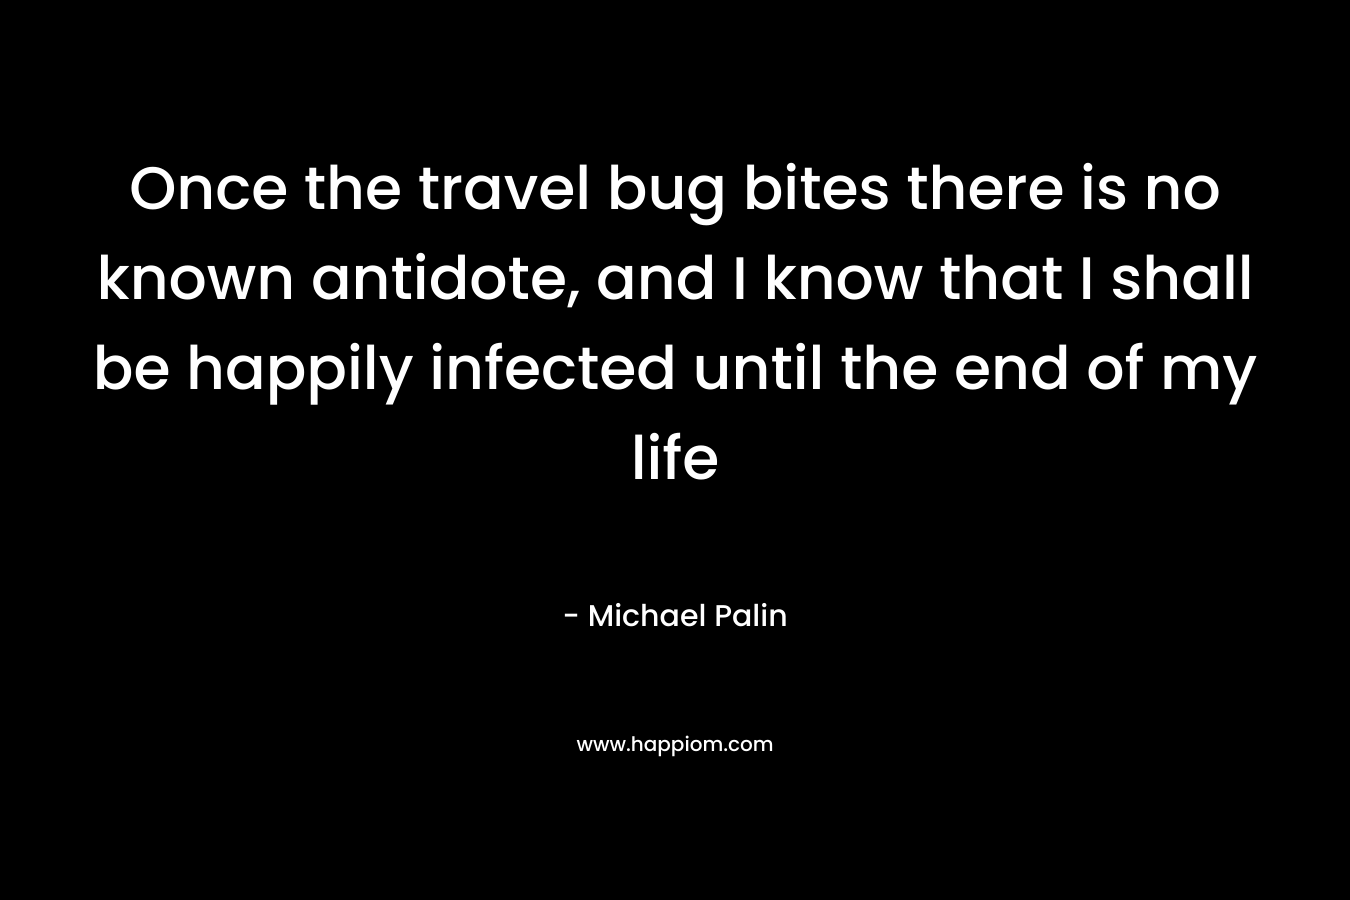 Once the travel bug bites there is no known antidote, and I know that I shall be happily infected until the end of my life